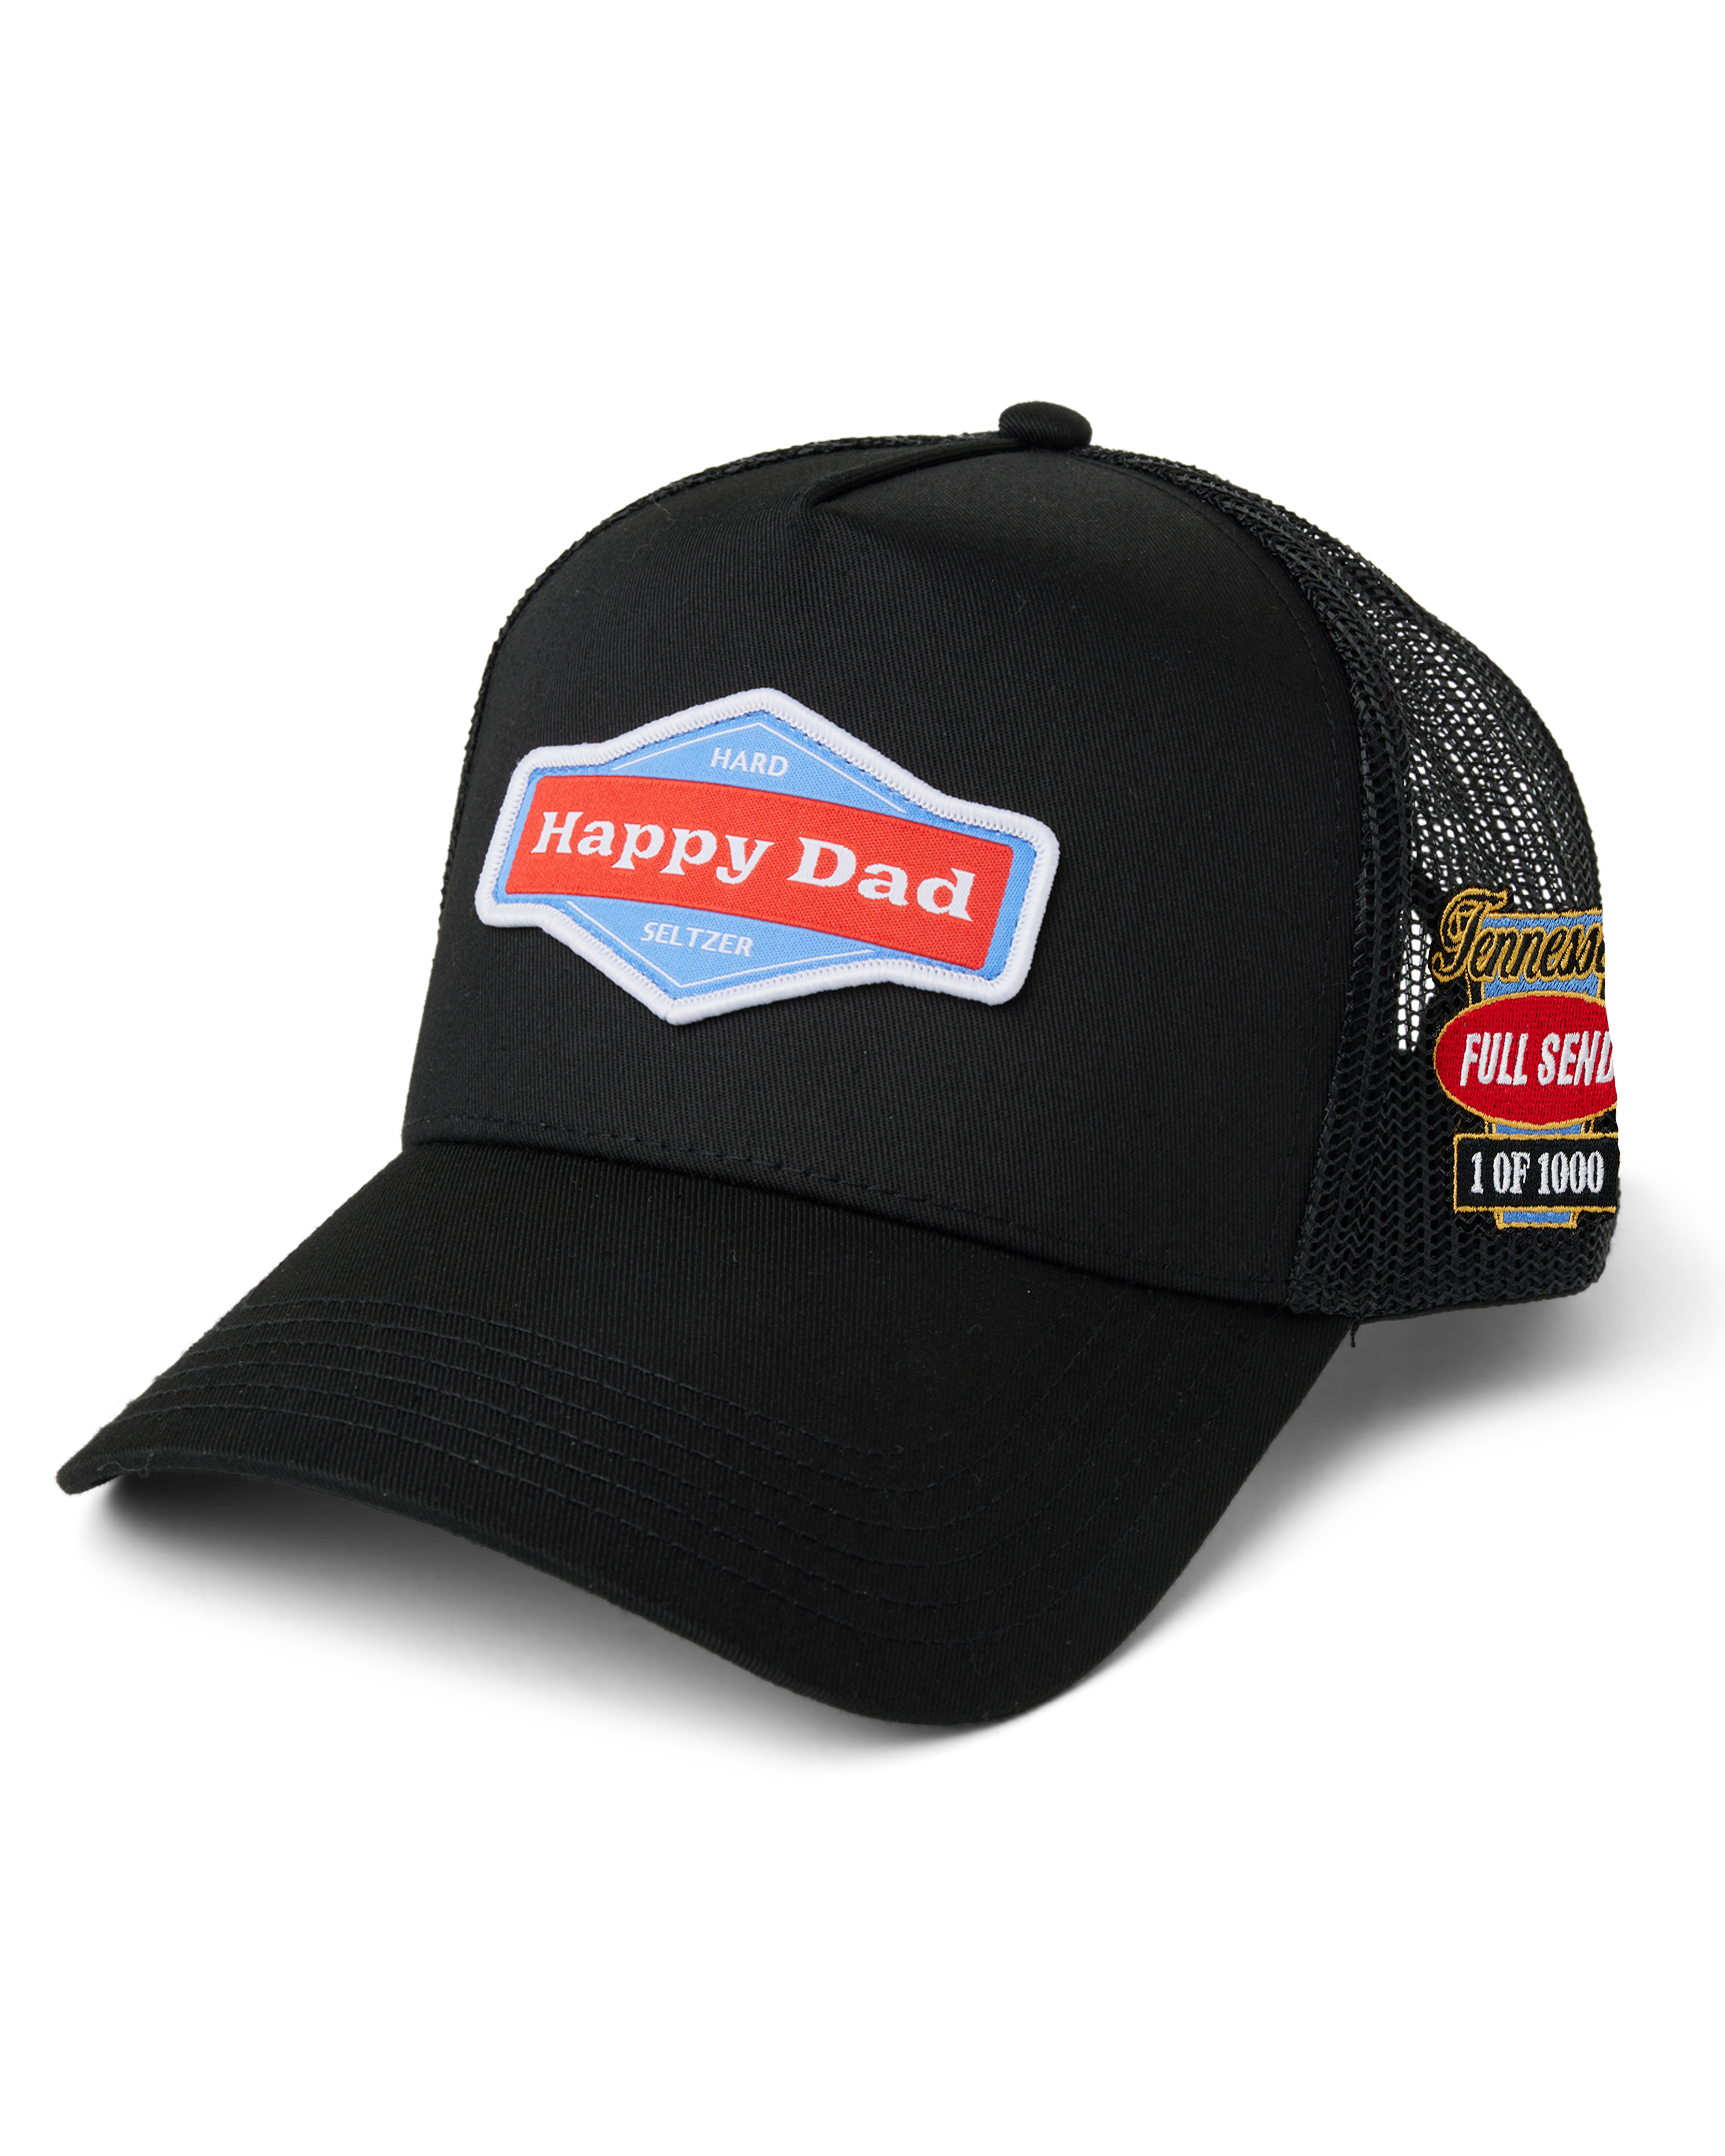 (Limited) Tennessee - Happy Dad State Trucker Hat 1 of 1000